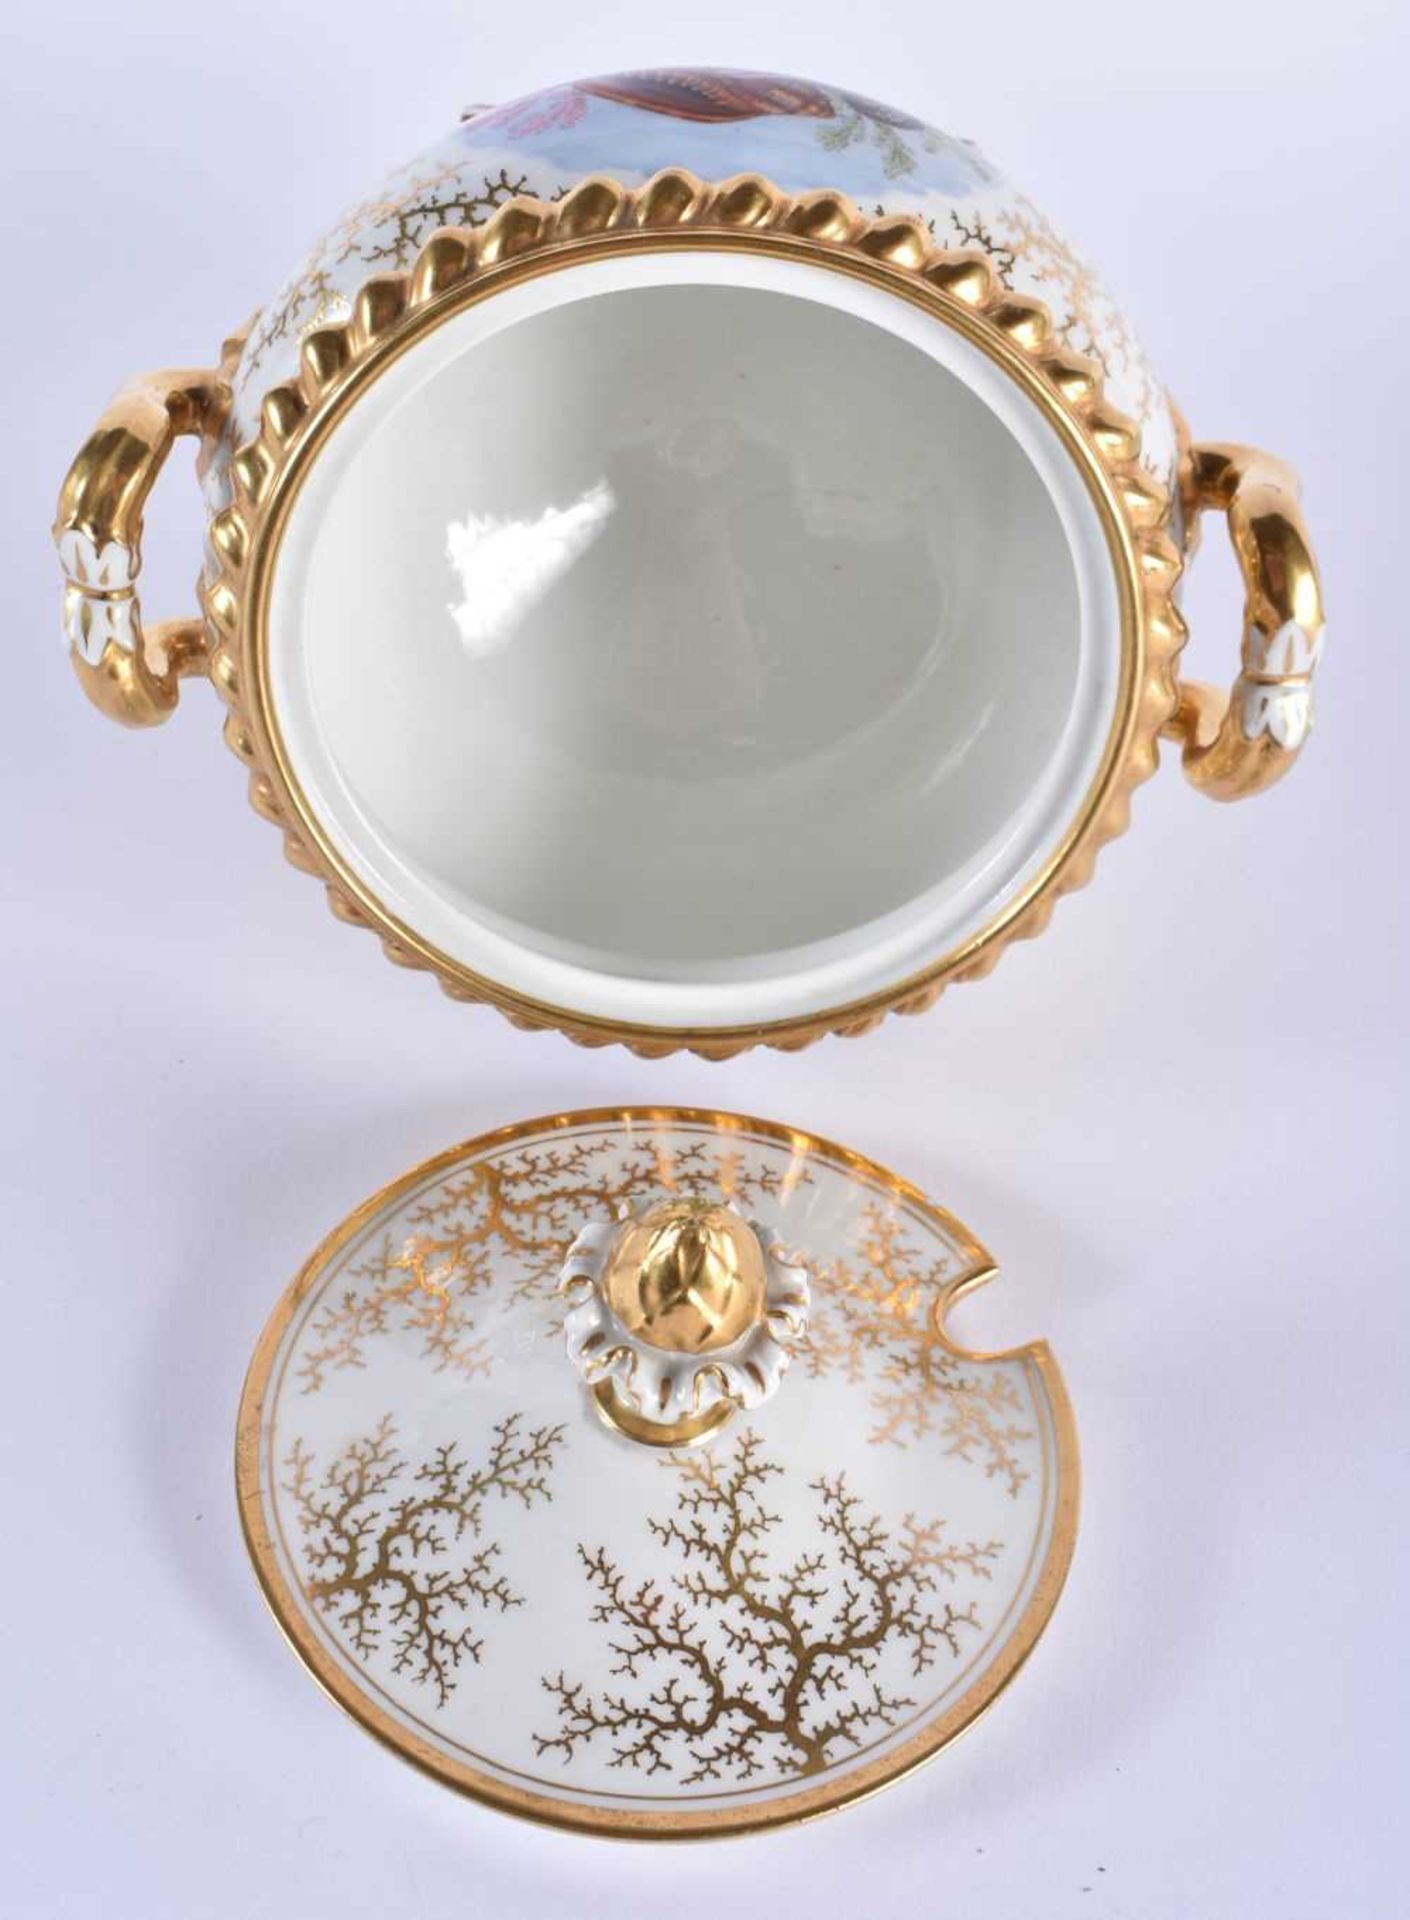 A FINE EARLY 19TH CENTURY FLIGHT BARR AND BARR WORCESTER DESSERT SERVICE painted with landscapes and - Image 12 of 32